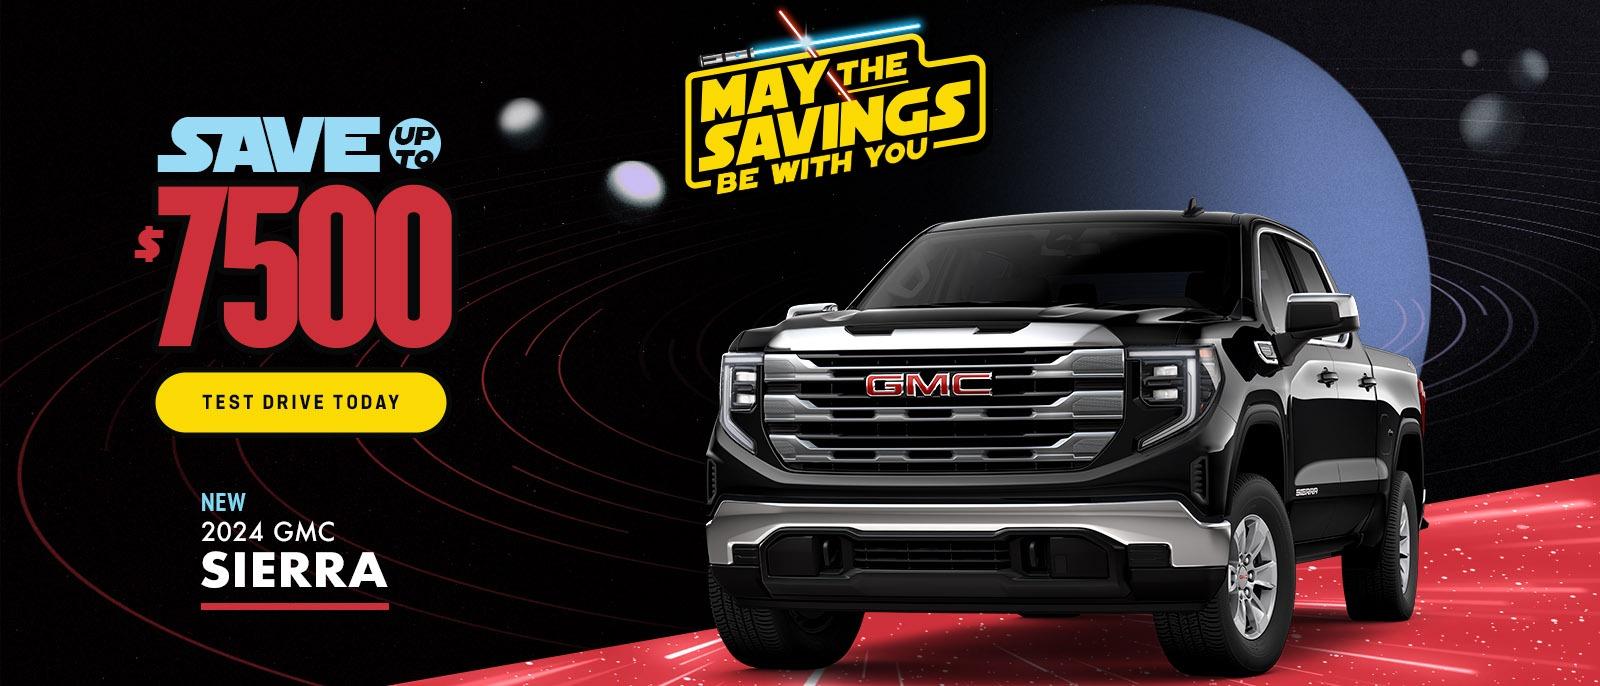 2024 GMC Sierra Save Up To $7500 Off MSRP